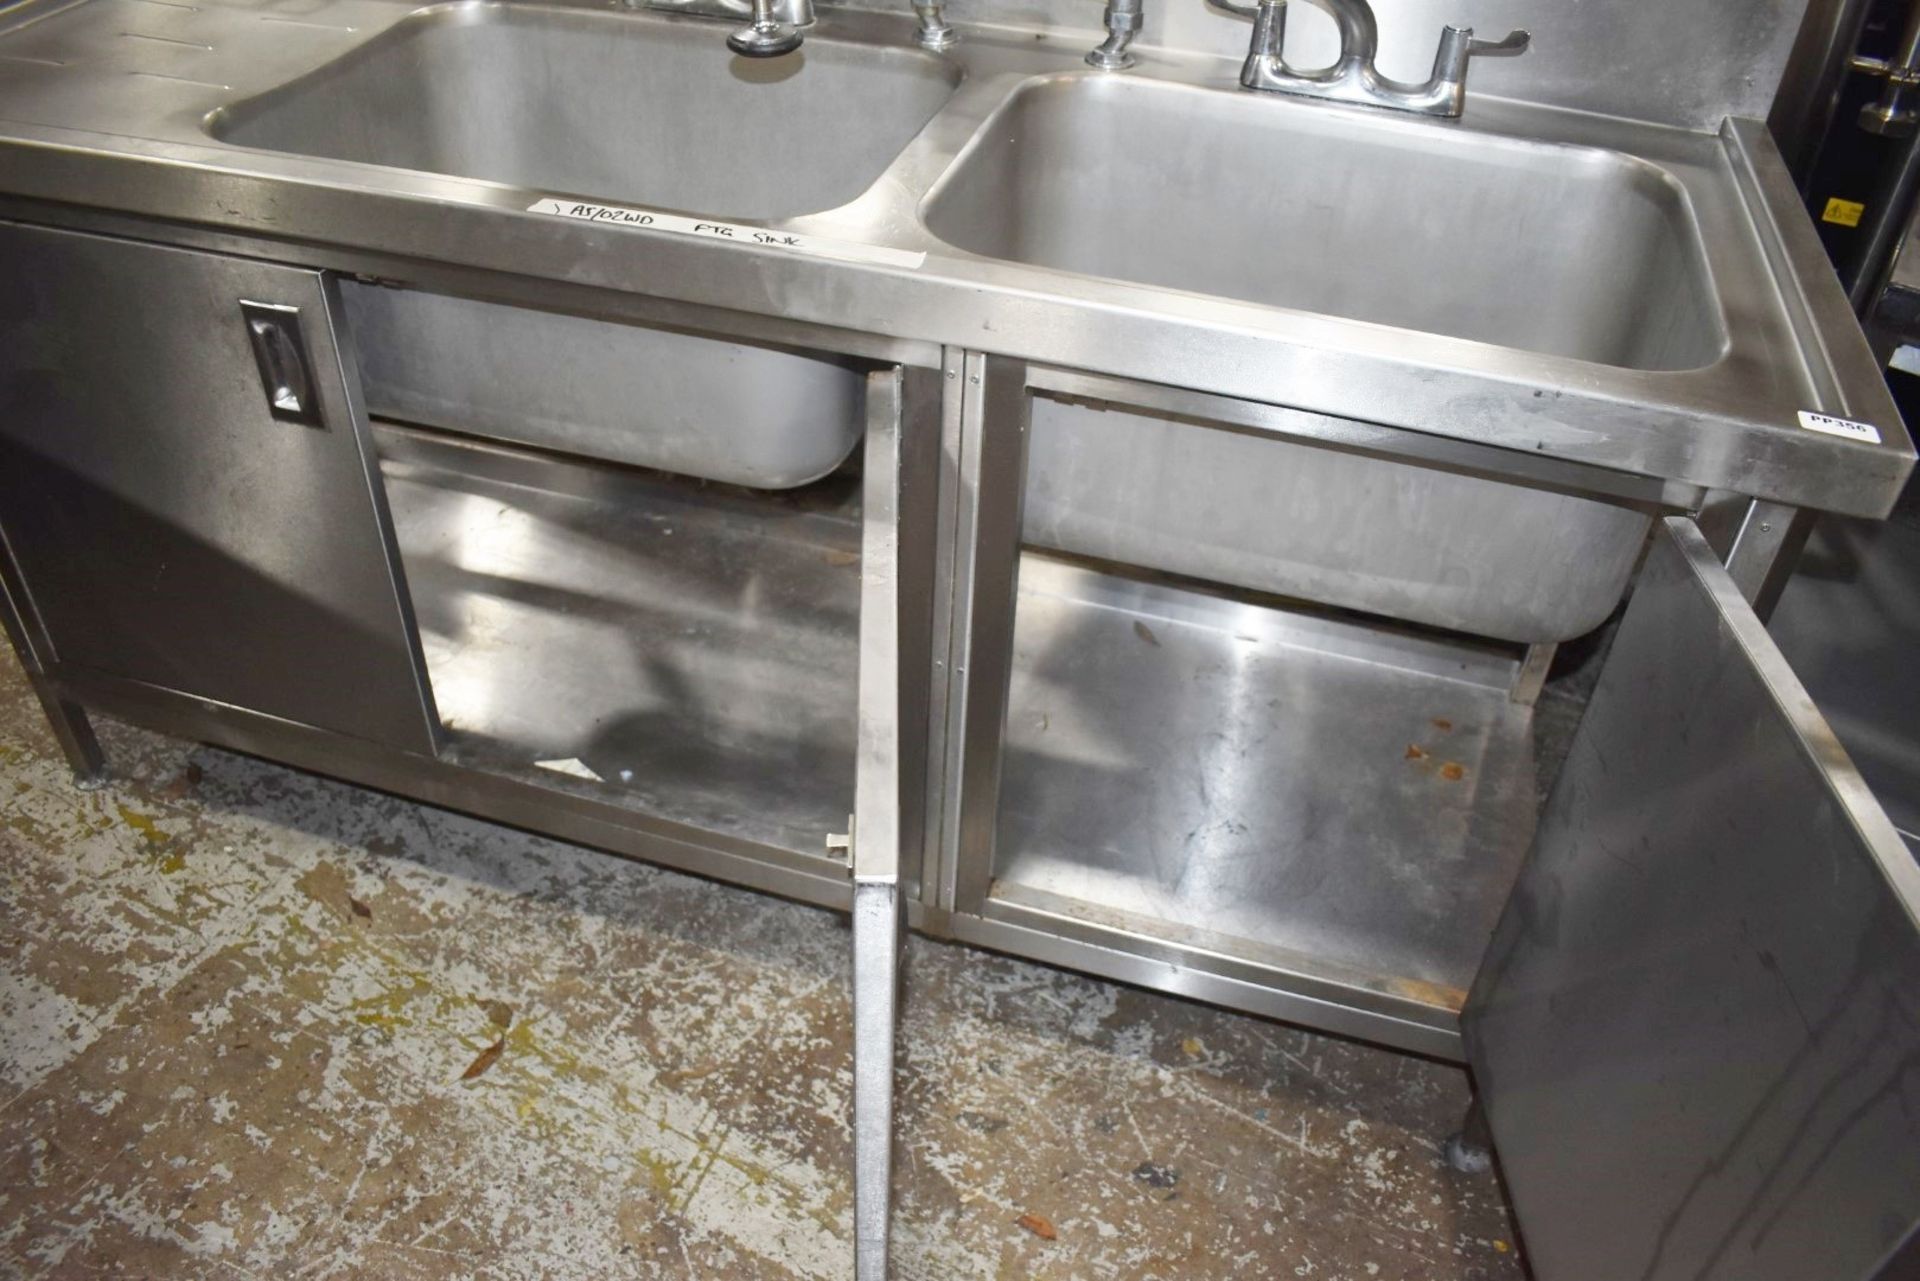 1 x Commercial Kitchen Wash Station With Two Large Sink Bowls, Mixer Taps, Spray Wash Gun, - Image 14 of 15